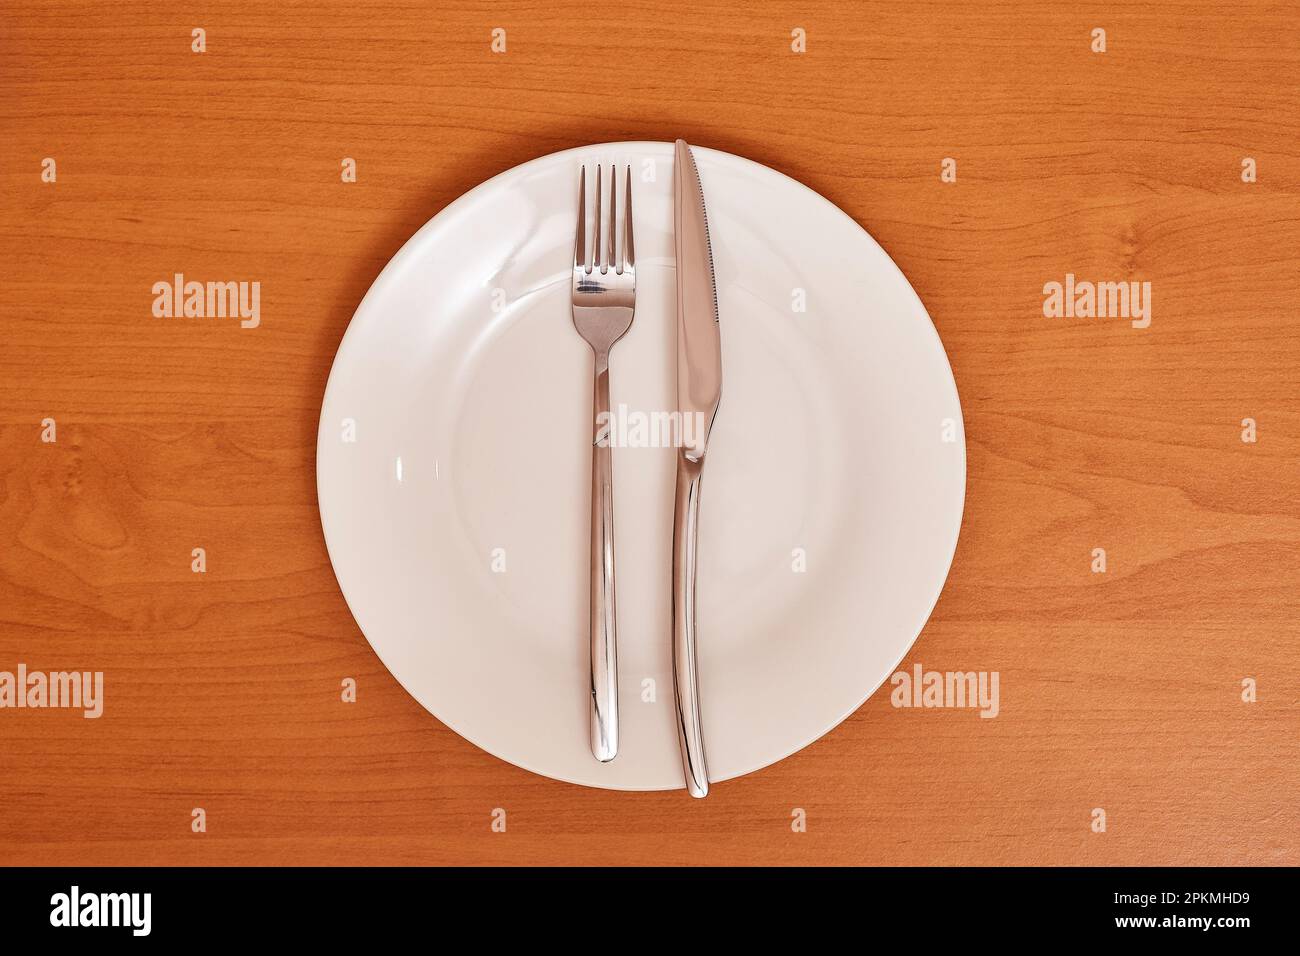 A signal 'The dish is wonderful'. Empty and clean blue plate with fork and knife on a wooden table as an example of table etiquette Stock Photo